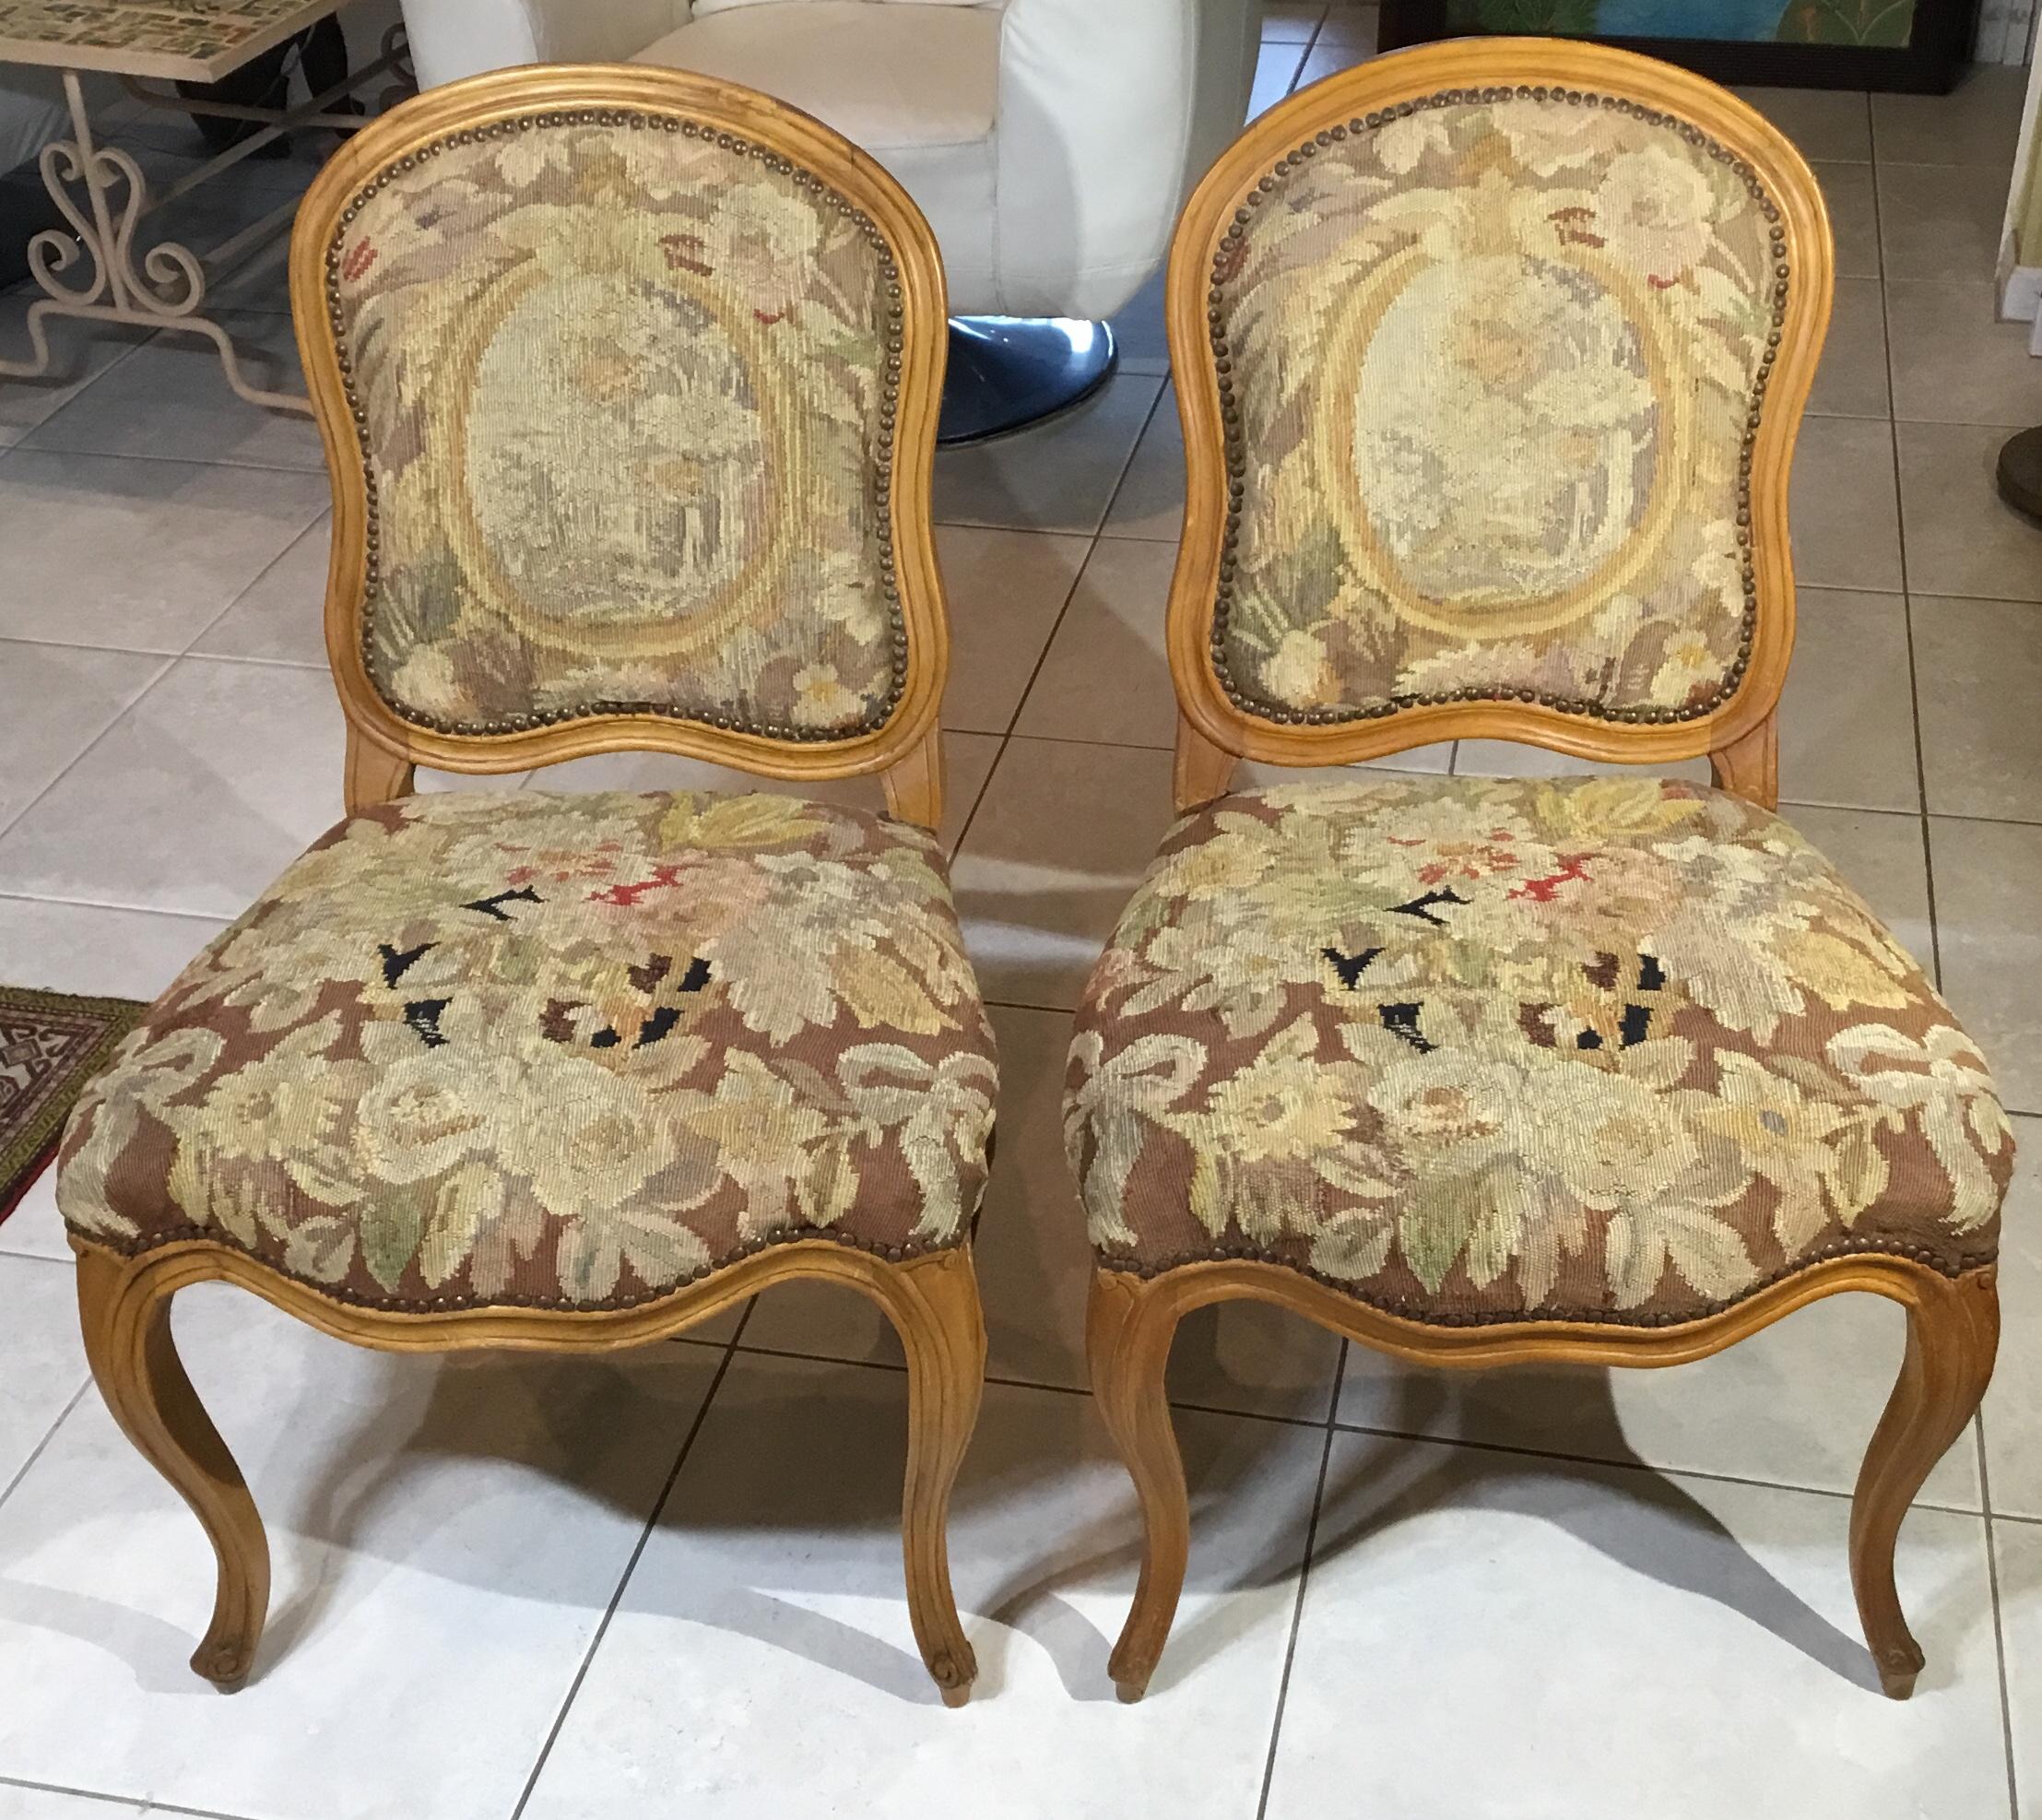 Elagent hand carved pair of chairs as early as 1930s ,with the original upholstery of antique Aubusson handwoven tapestry. Tapestry in both chairs has some repairs due to use and time ,and one small repair it the wood in one chair ,also some minor